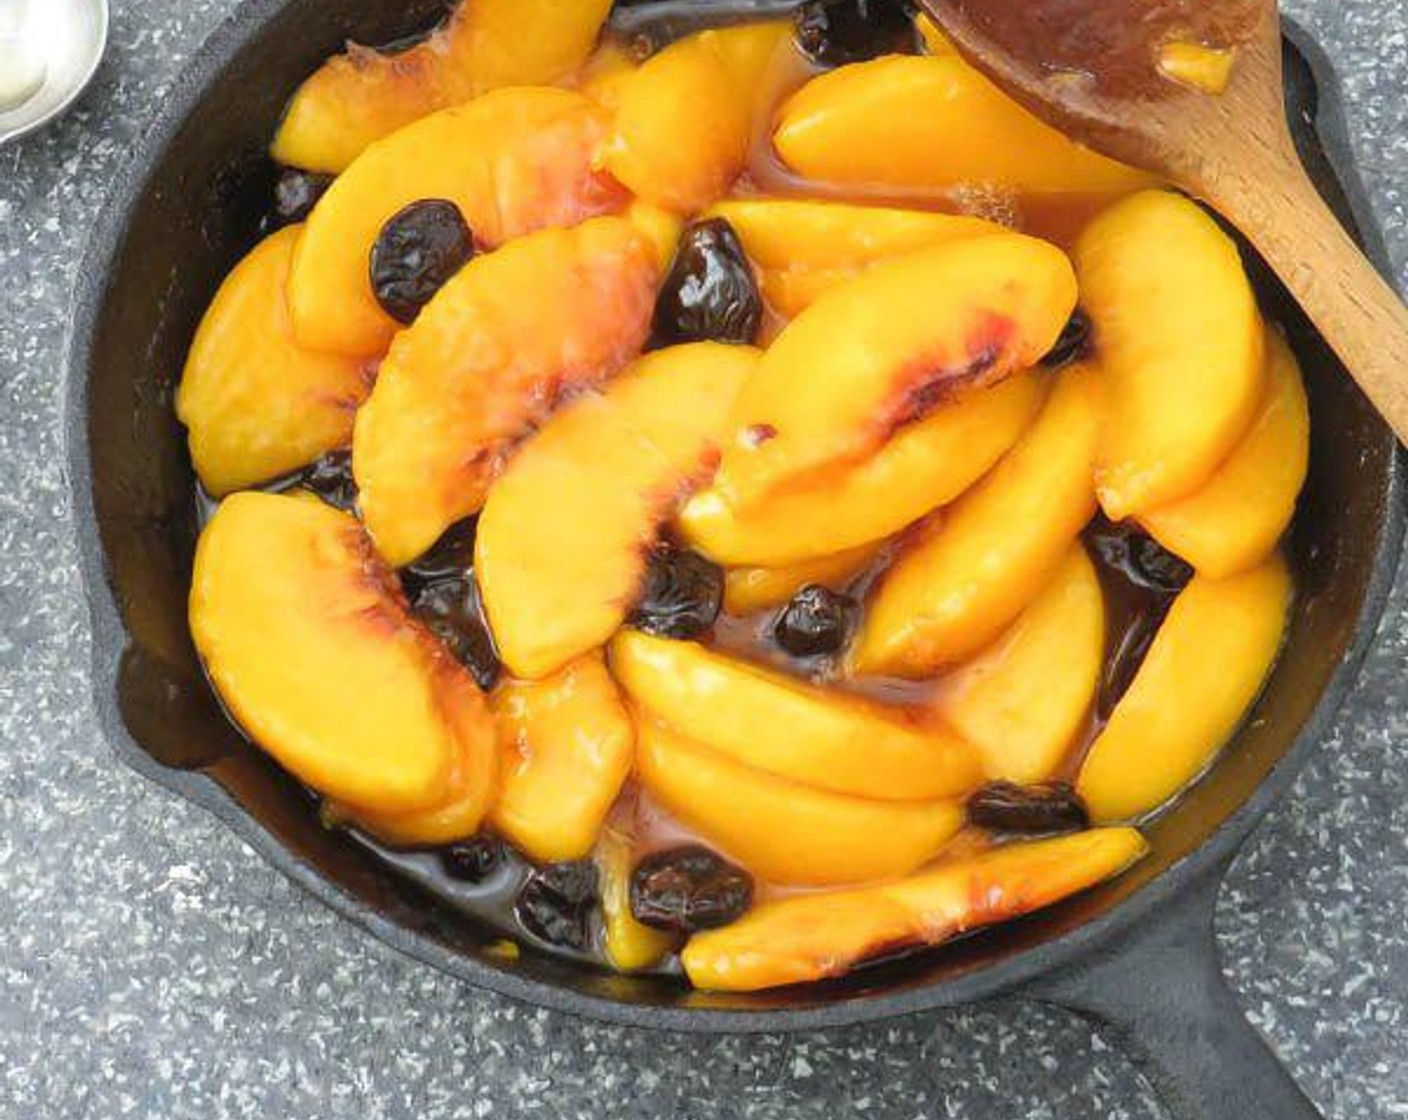 step 4 Stir until combined, then set aside. Melt Butter (2 Tbsp) in a small cast iron skillet over medium heat. Add peaches, amaretto soaked cherries, Granulated Sugar (1 Tbsp) and Corn Starch (3/4 tsp). Cook for 2-3 minutes until liquid thickens slightly.